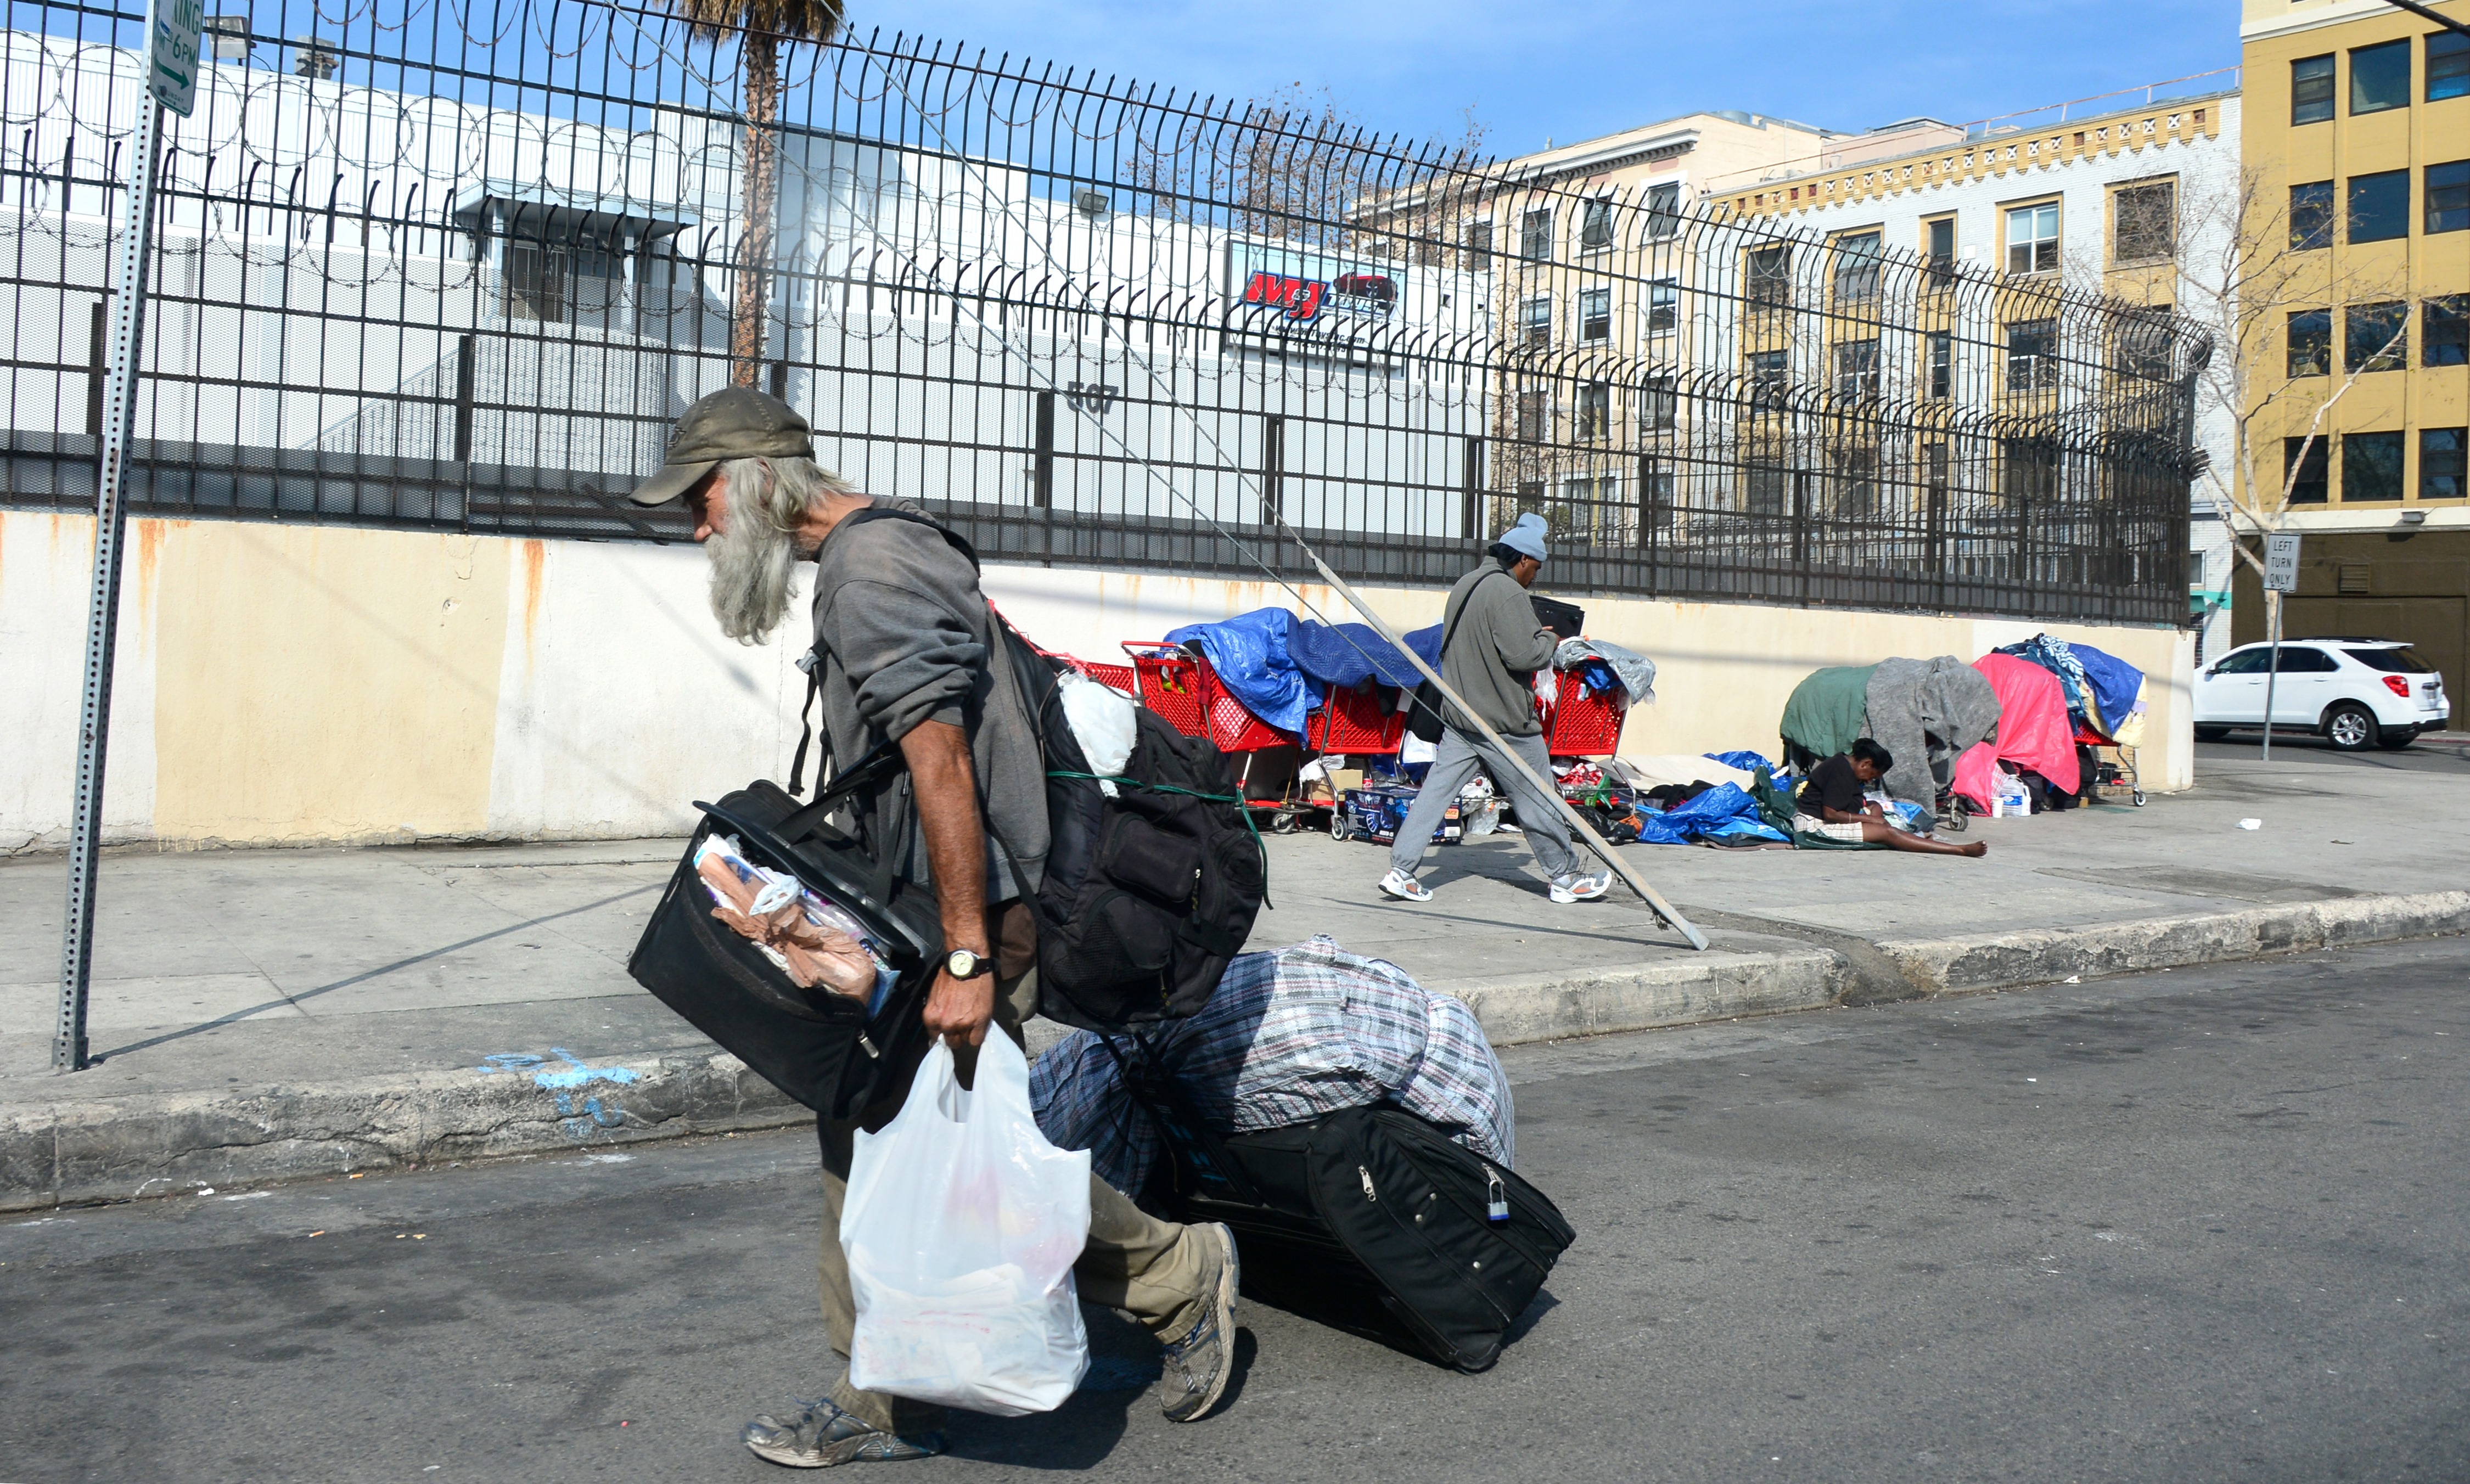 A man carries his belongings while walking past homeless people sitting amid their belongings on a street in downtown Los Angeles, California, on January 8, 2014. (FREDERIC J. BROWN—AFP/Getty Images)